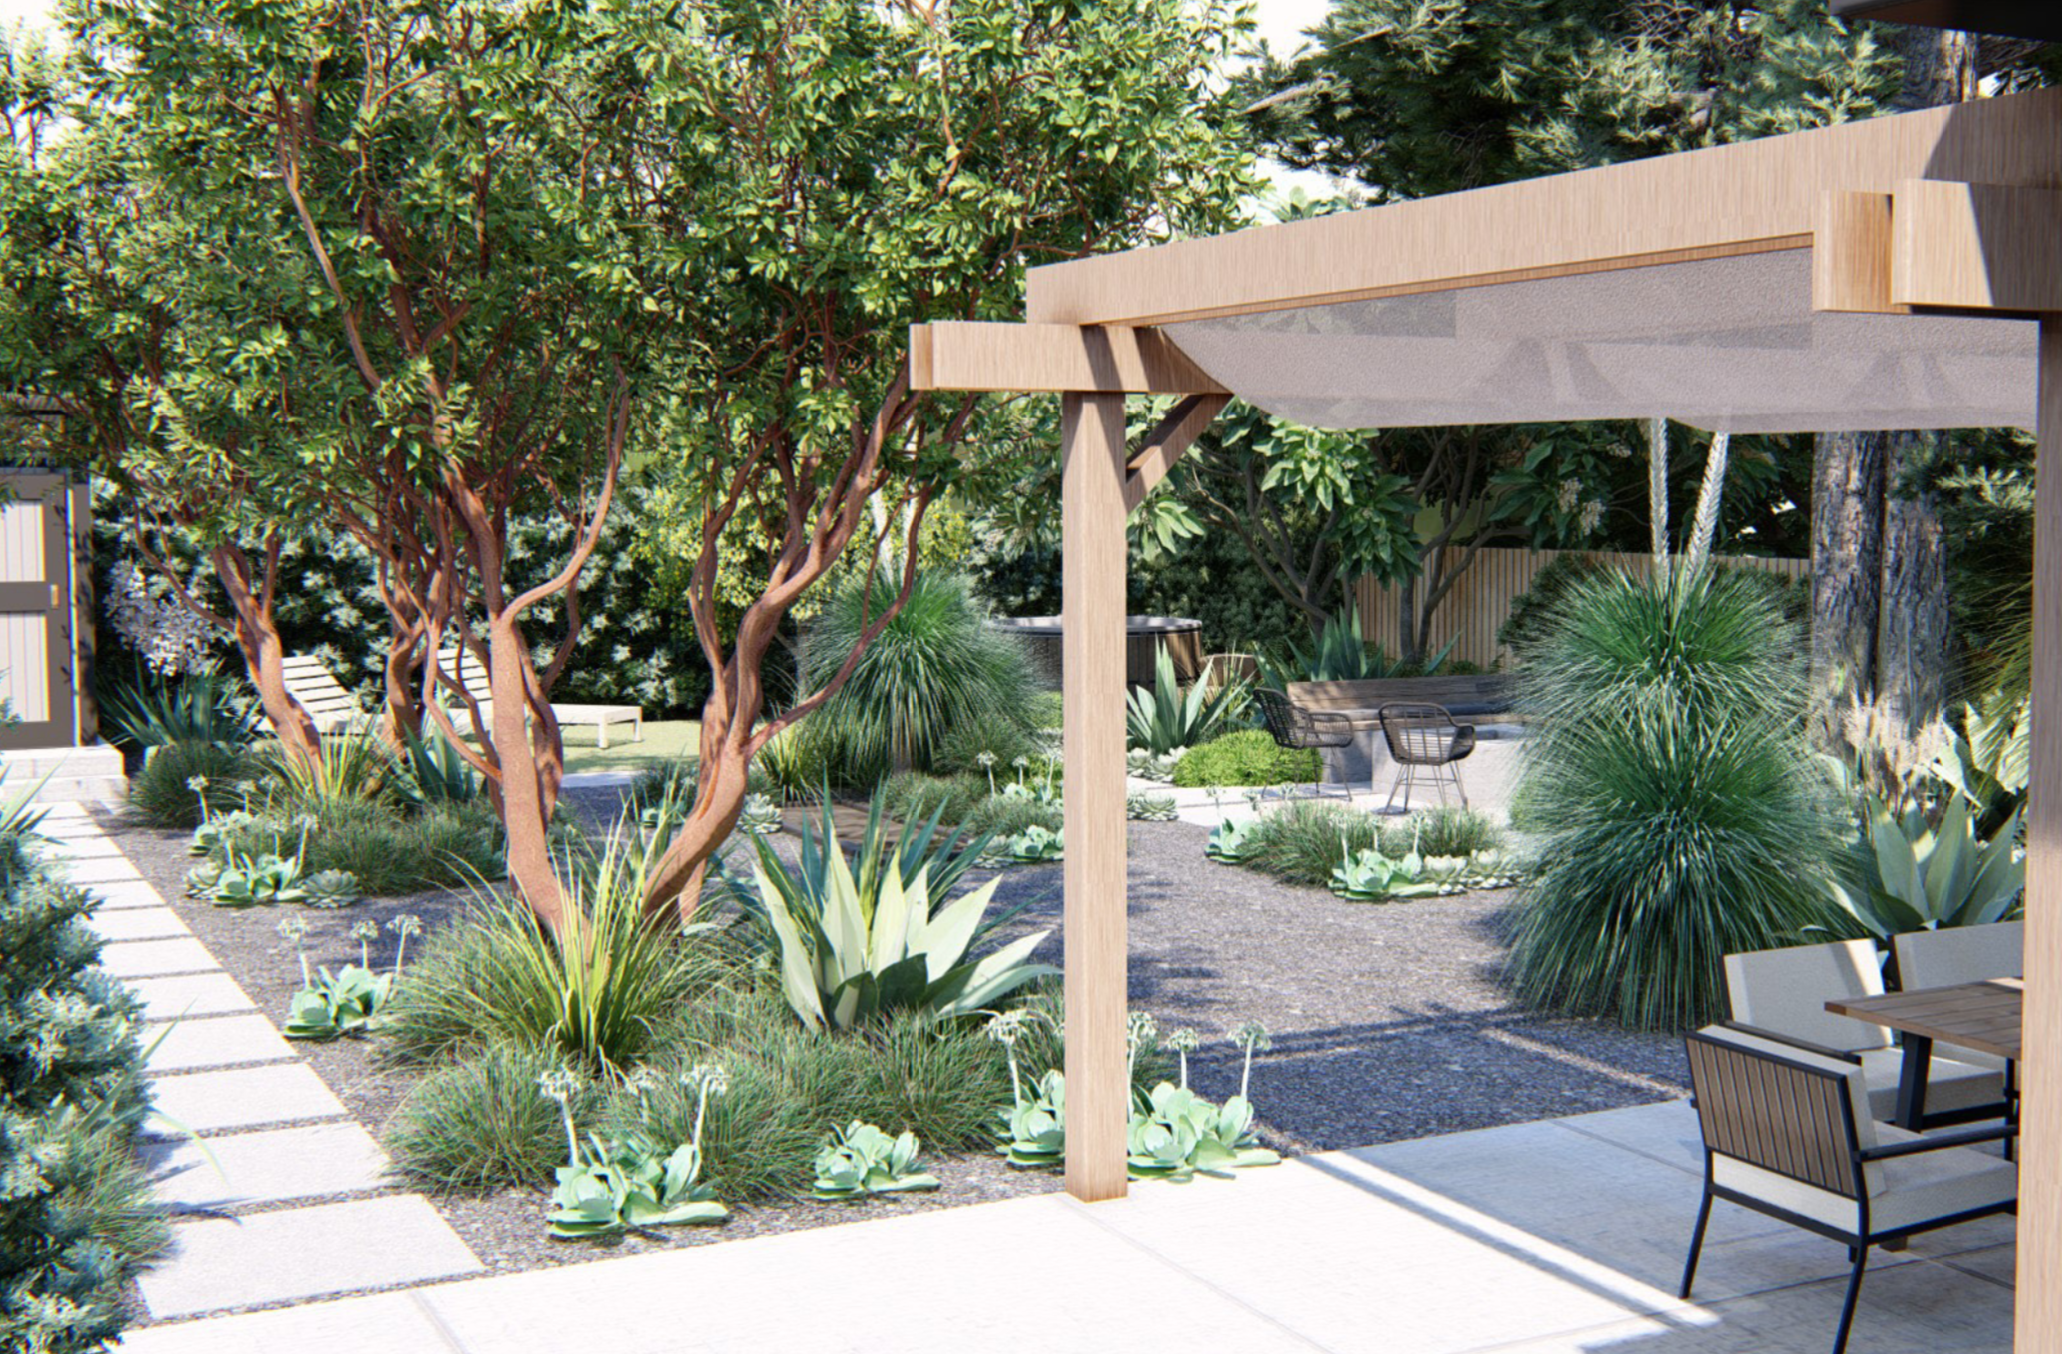 A digital view of Saletnik and Vesely’s new backyard design with a refurbished concrete patio and shade structure. New plantings are lush while still being low maintenance and waterwise.